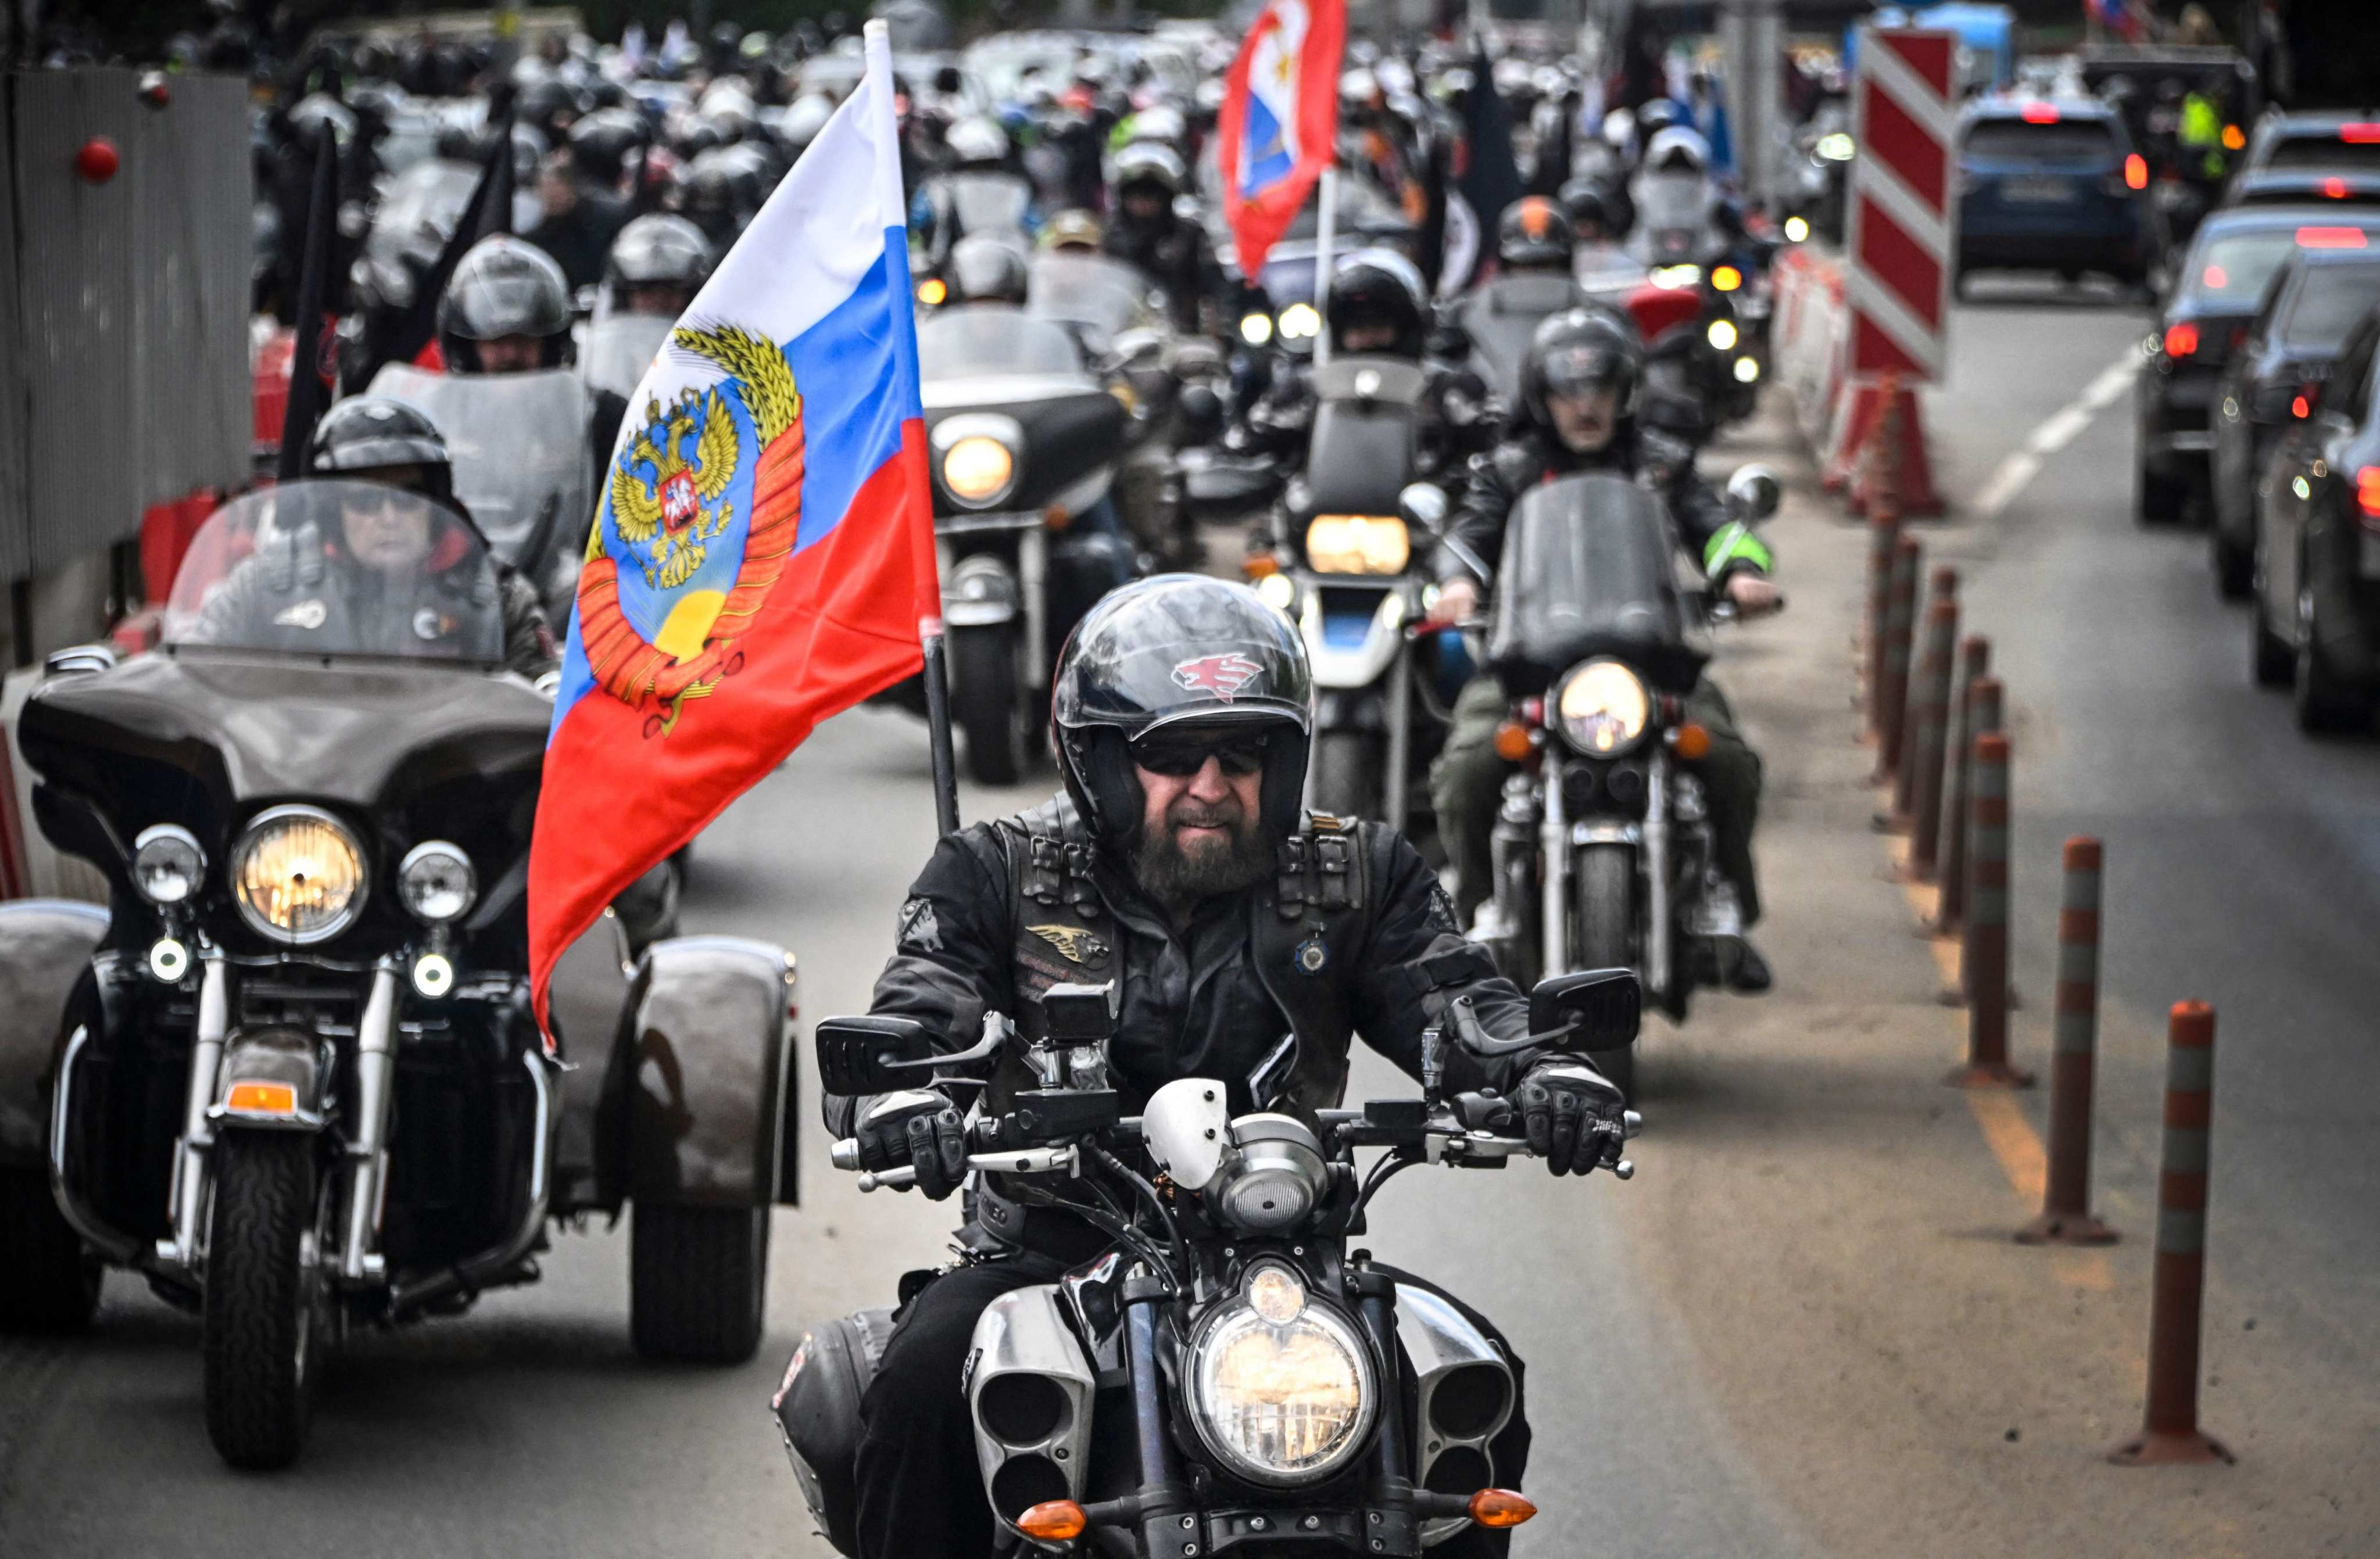 Alexander Zaldostanov, centre, a leader of the Night Wolves bikers’ club, leads a convoy in Moscow on Saturday. Photo: AFP